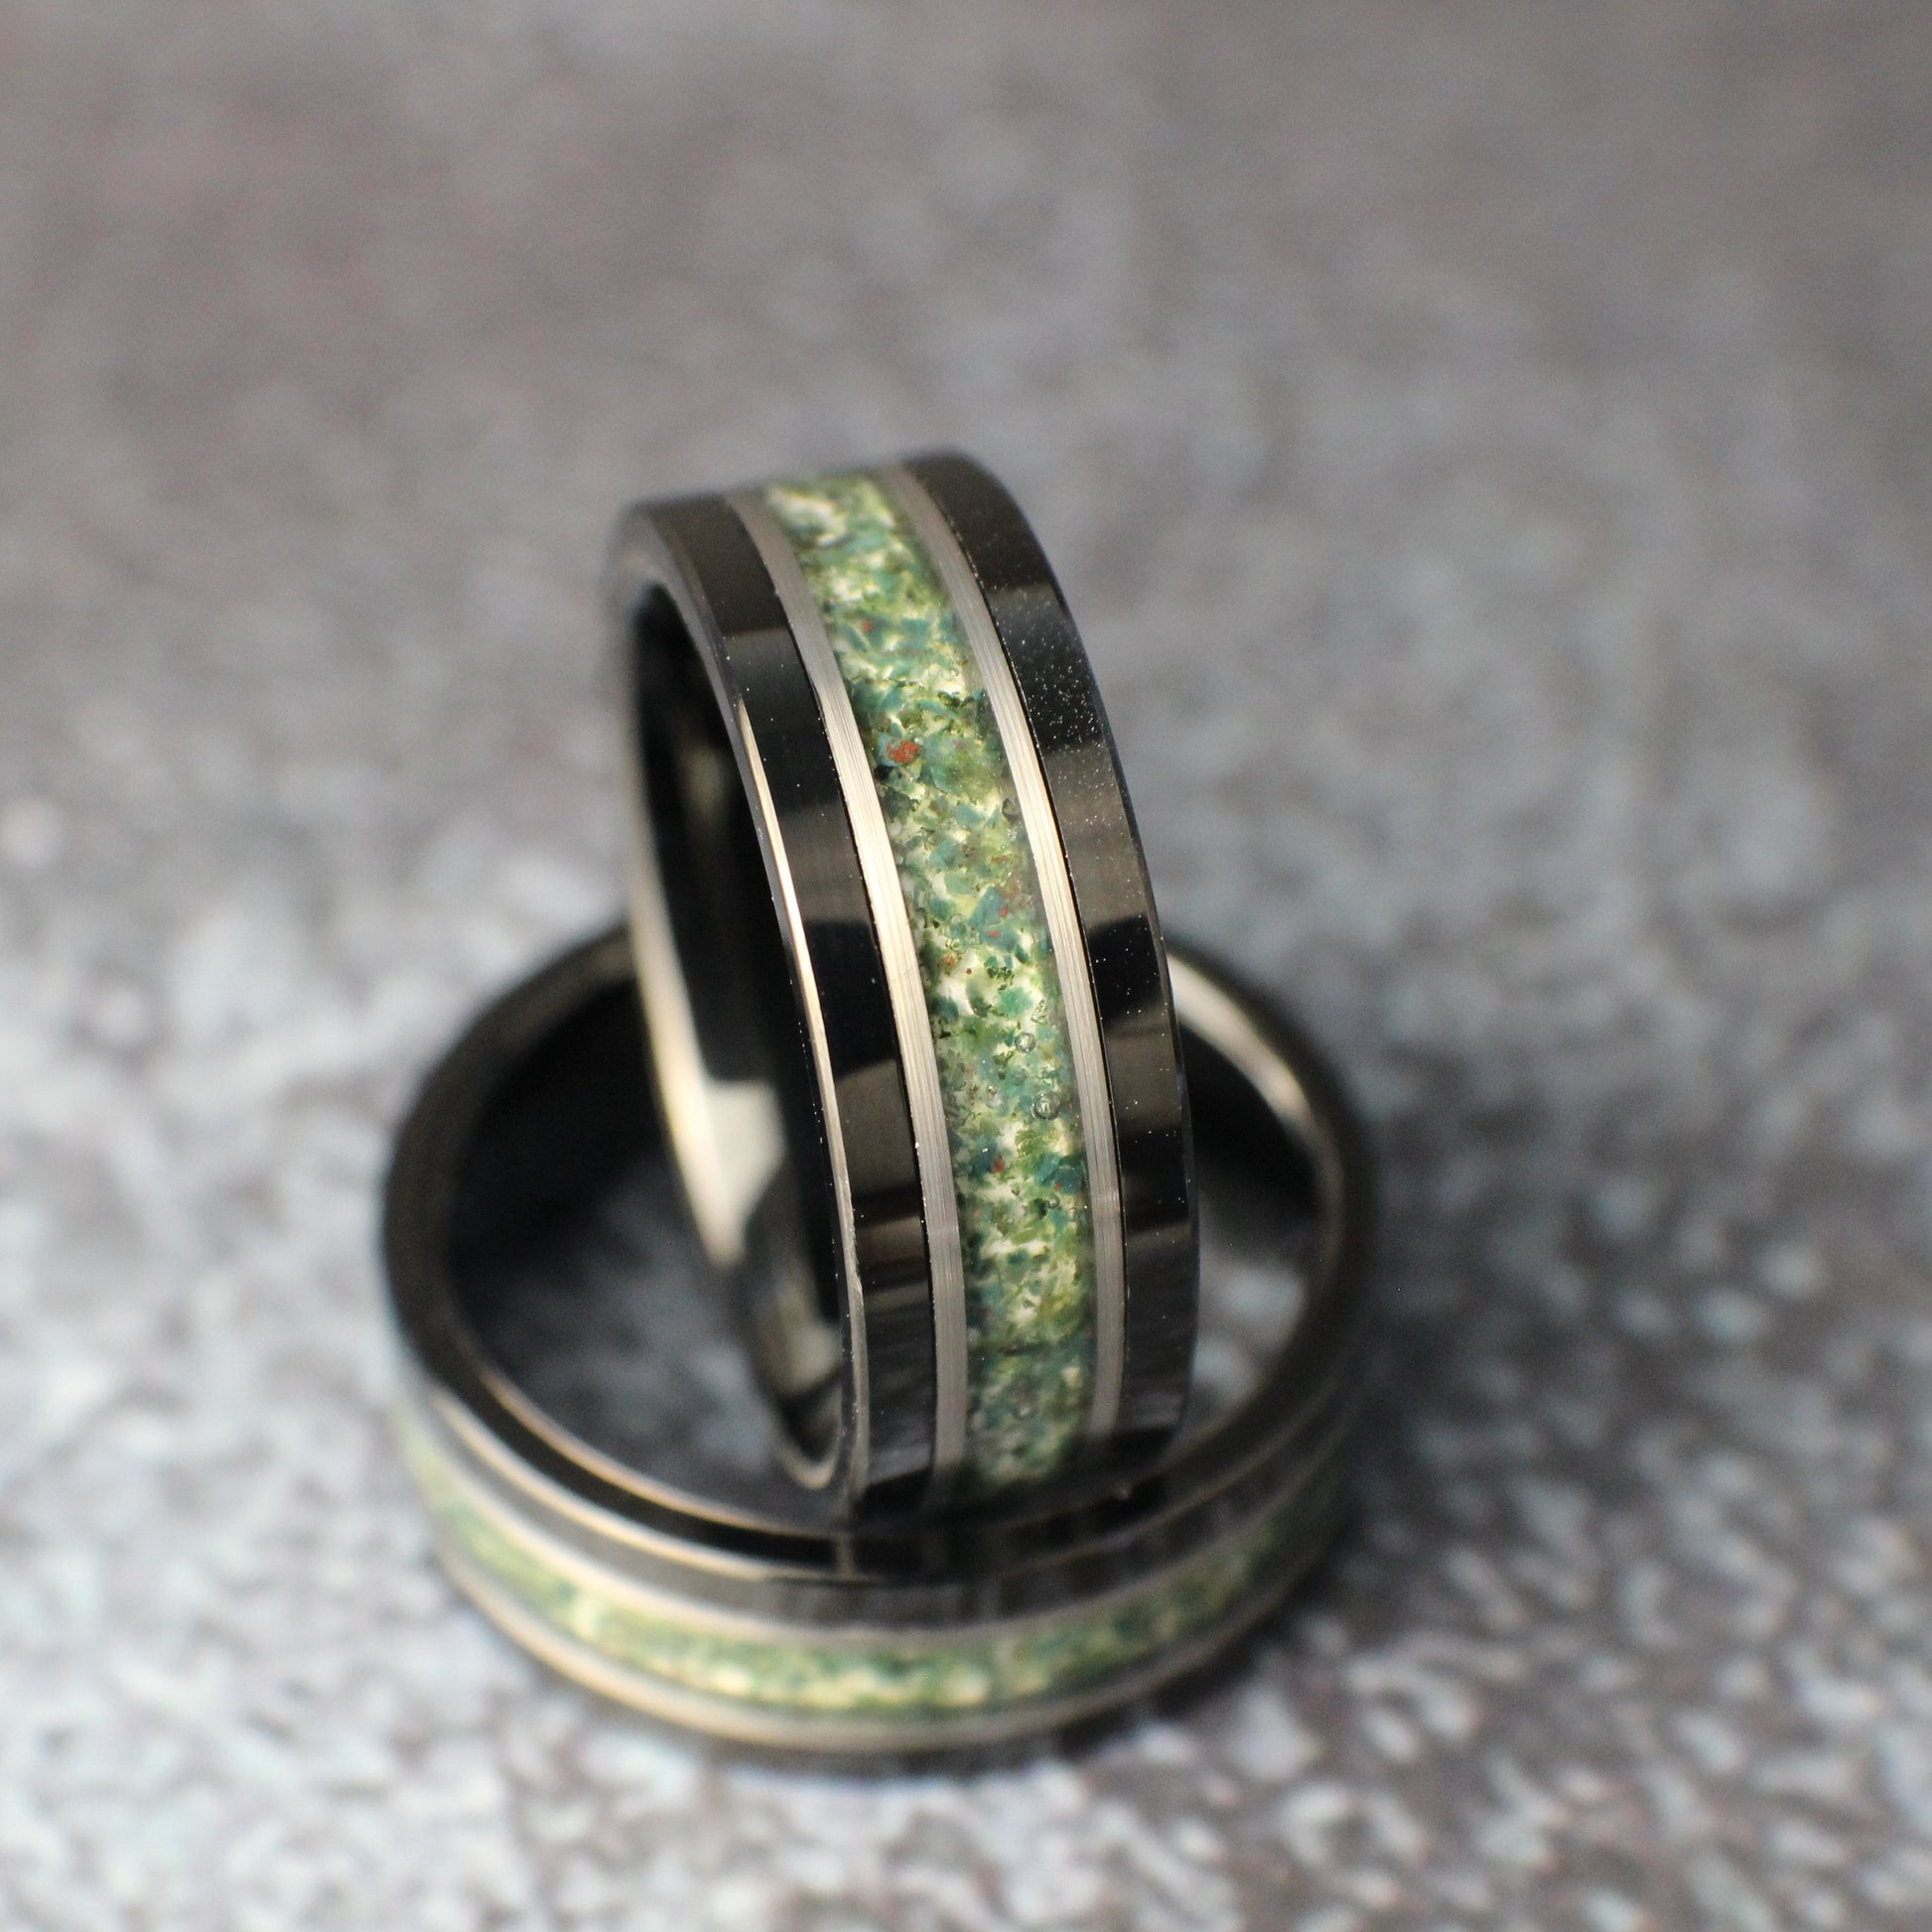 Moss agate ring for men that can be used for weddings, anniversary, or promise rings